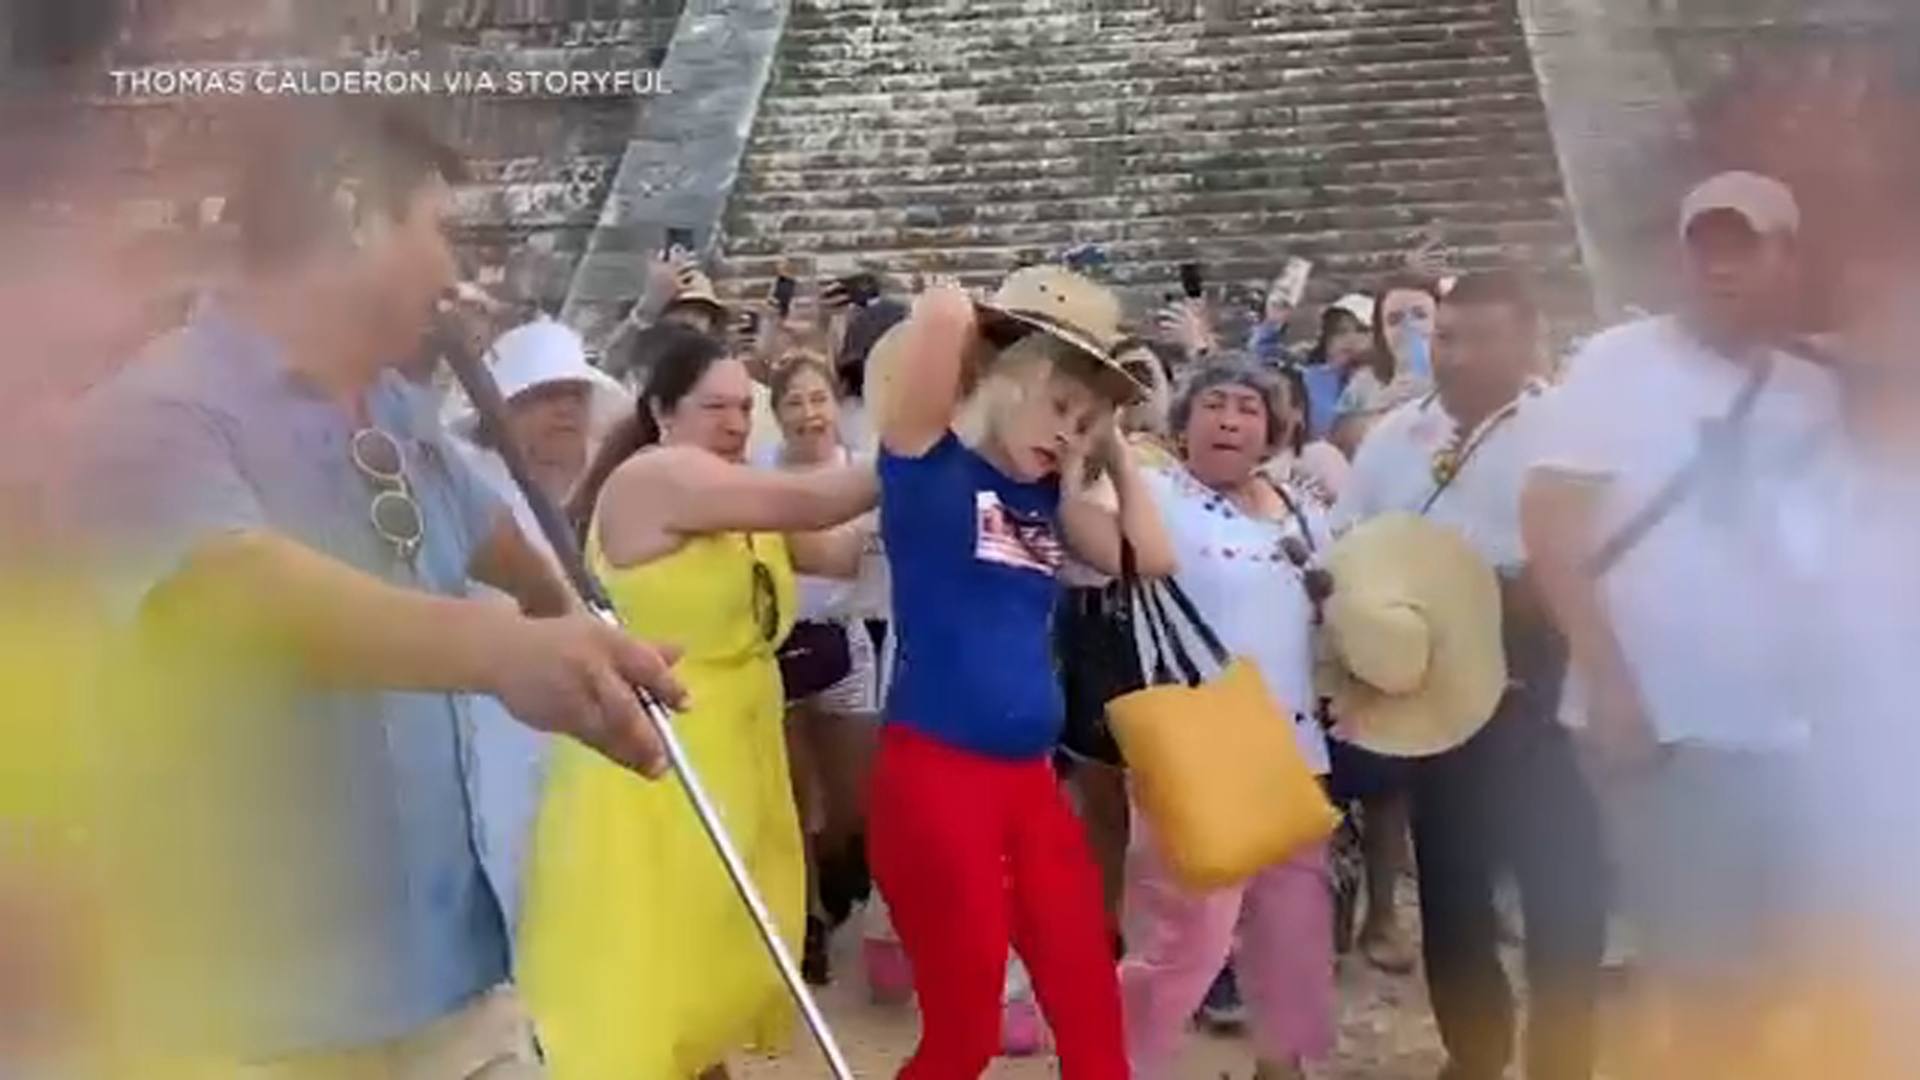 Tourist booed, doused with water after climbing stairs at protected Mayan pyramid in Mexico￼